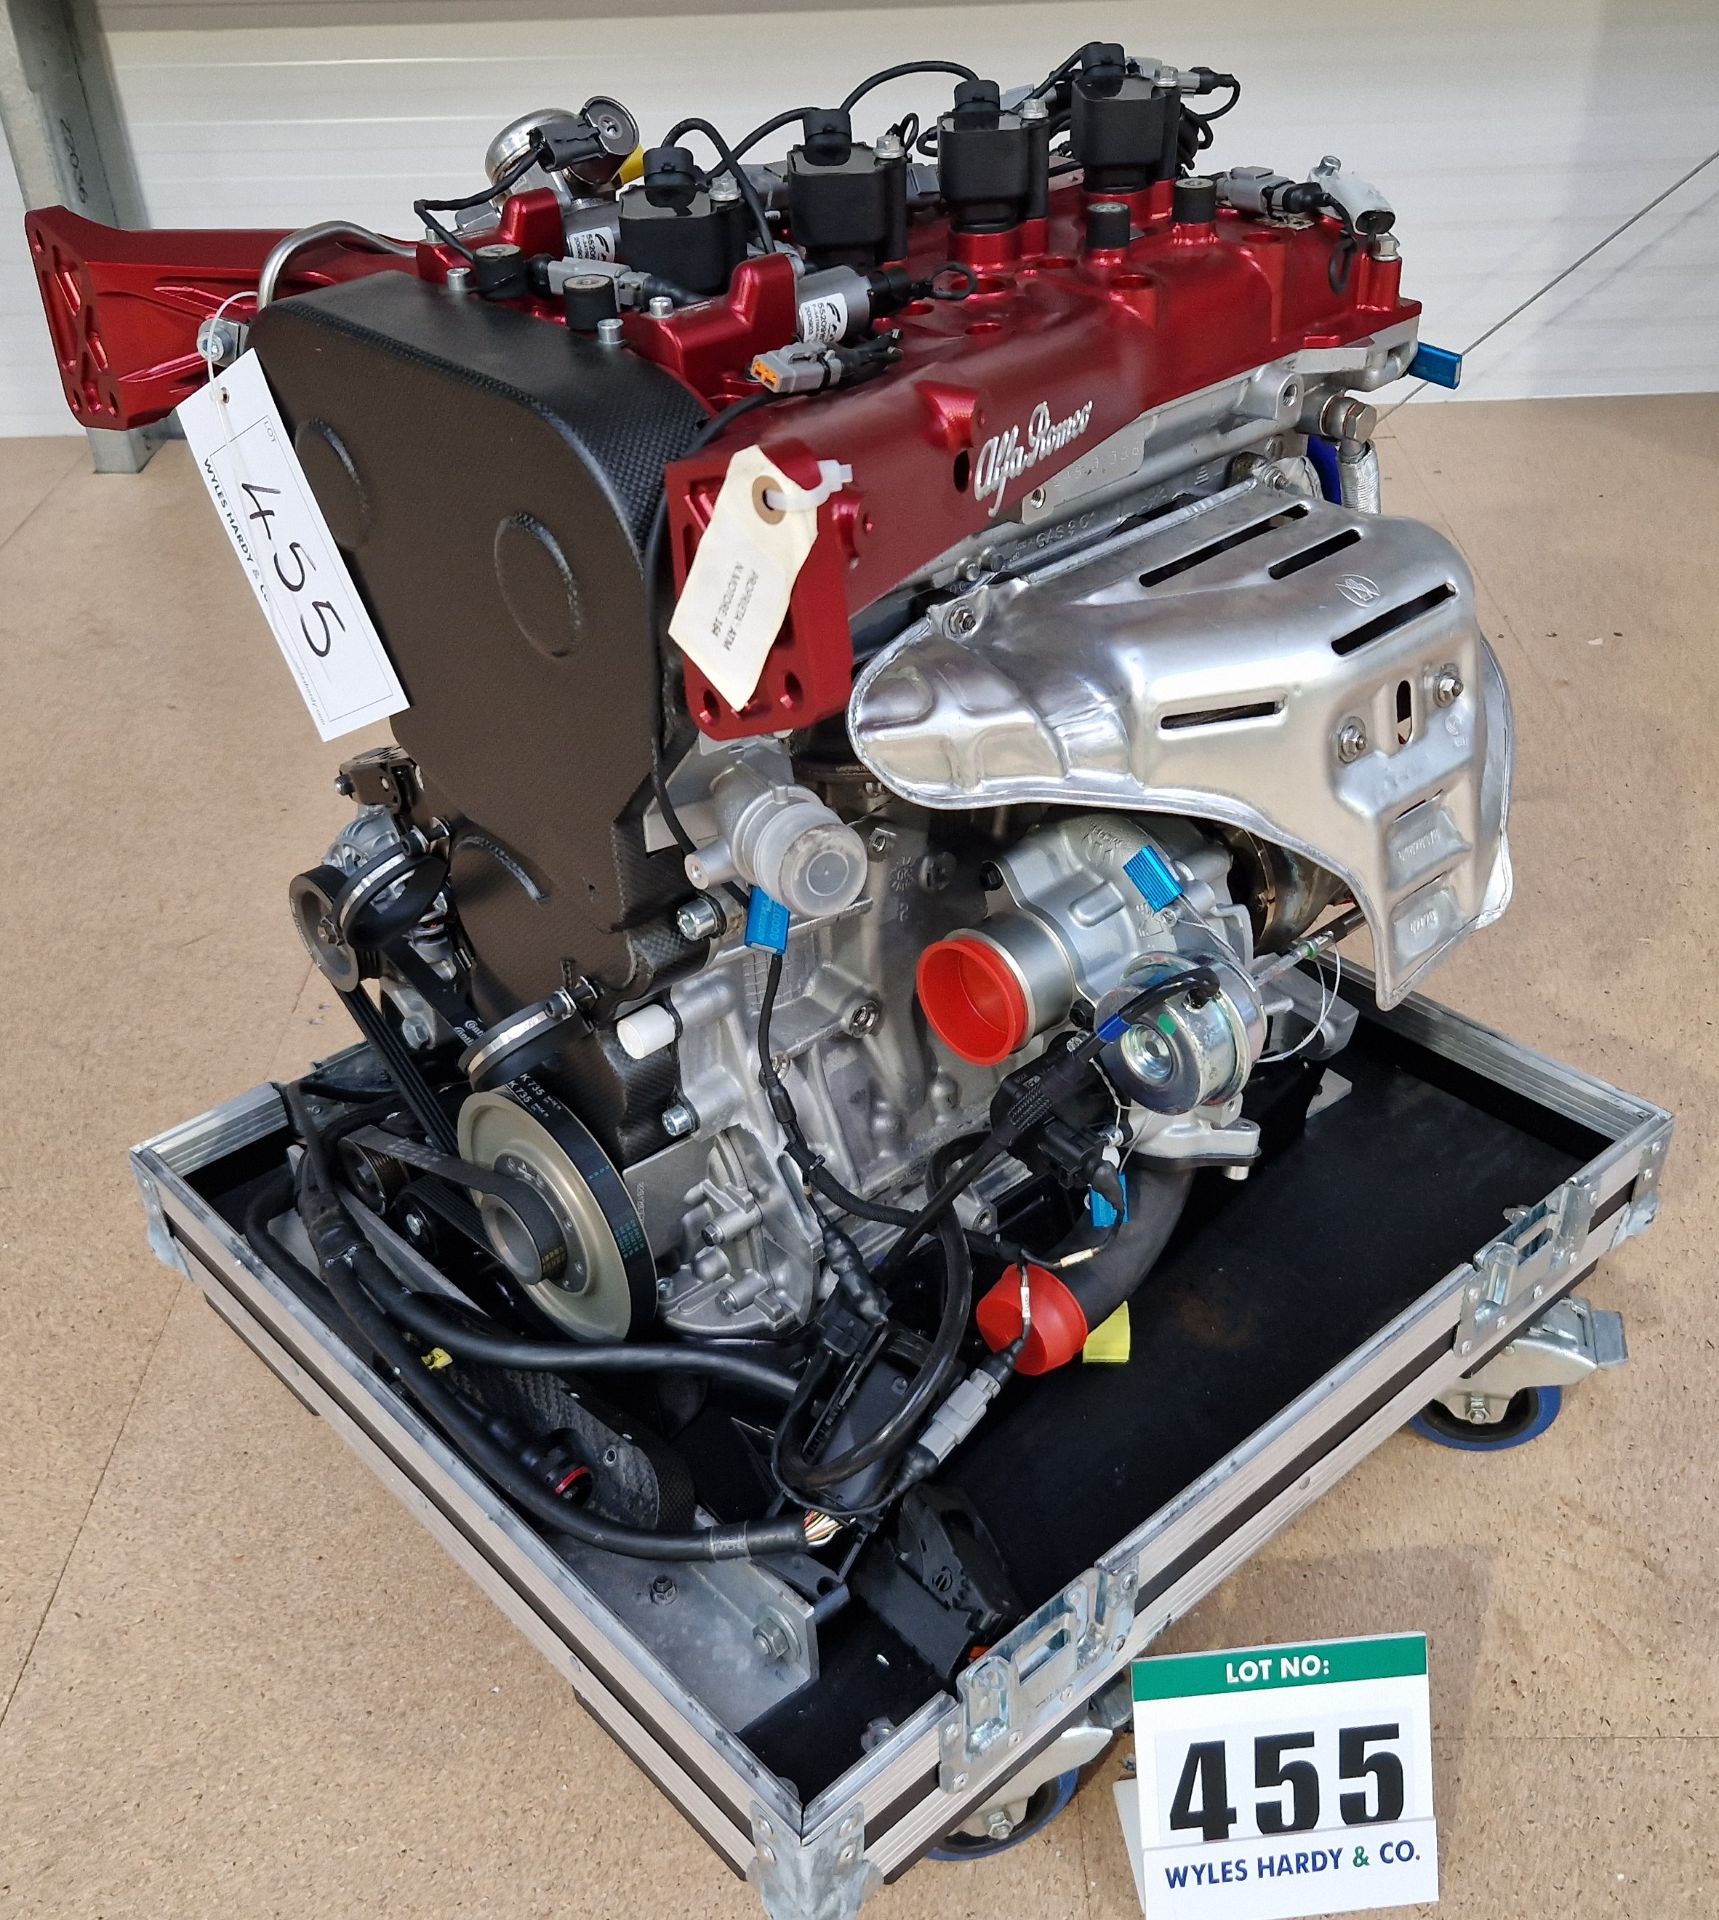 One ALPHA ROMEO 1.75L Twin Overhead Cam Turbocharged Race Car Engine, No. 164 in a Castor mounted